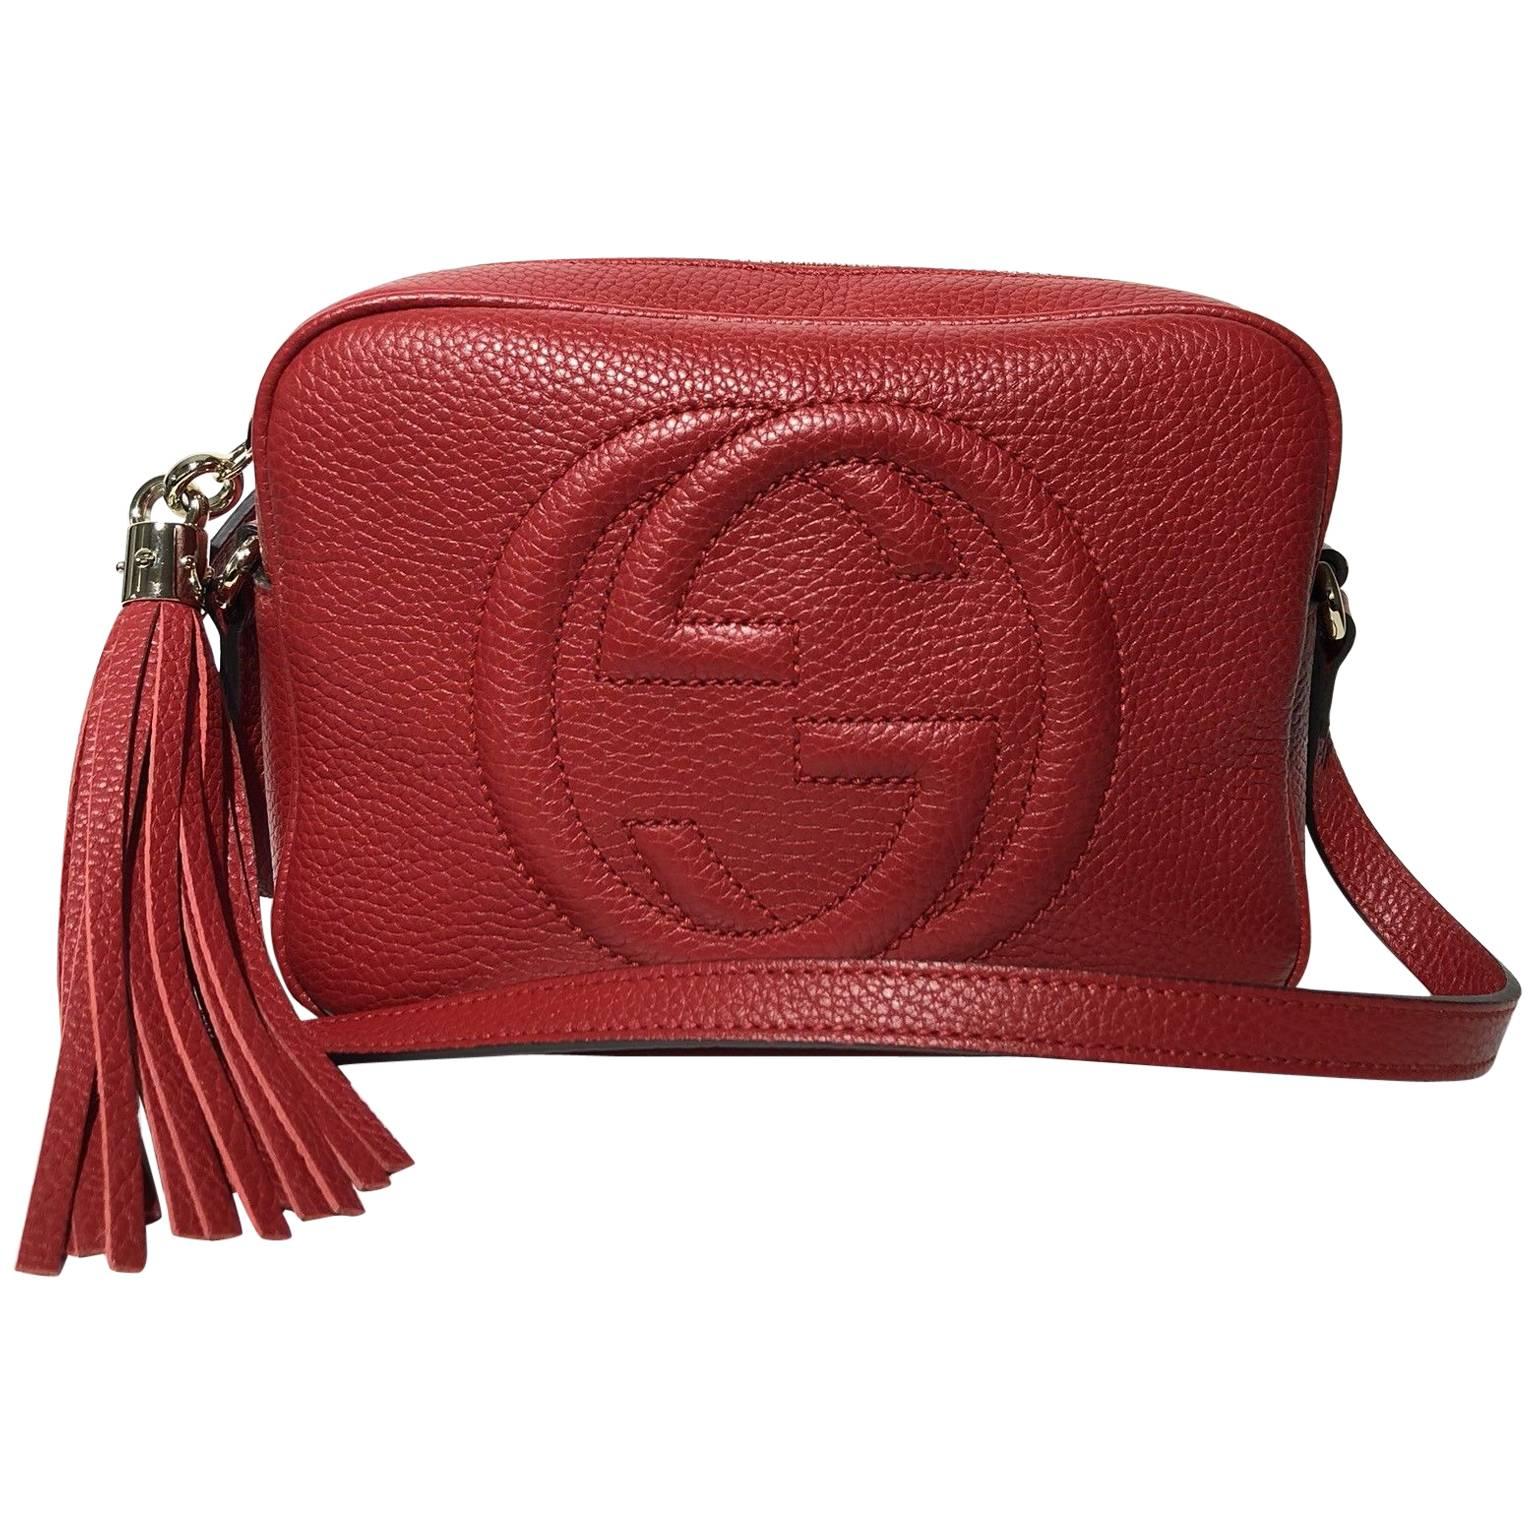 Gucci Soho Disco Leather Shoulder Crossbody Bag red new